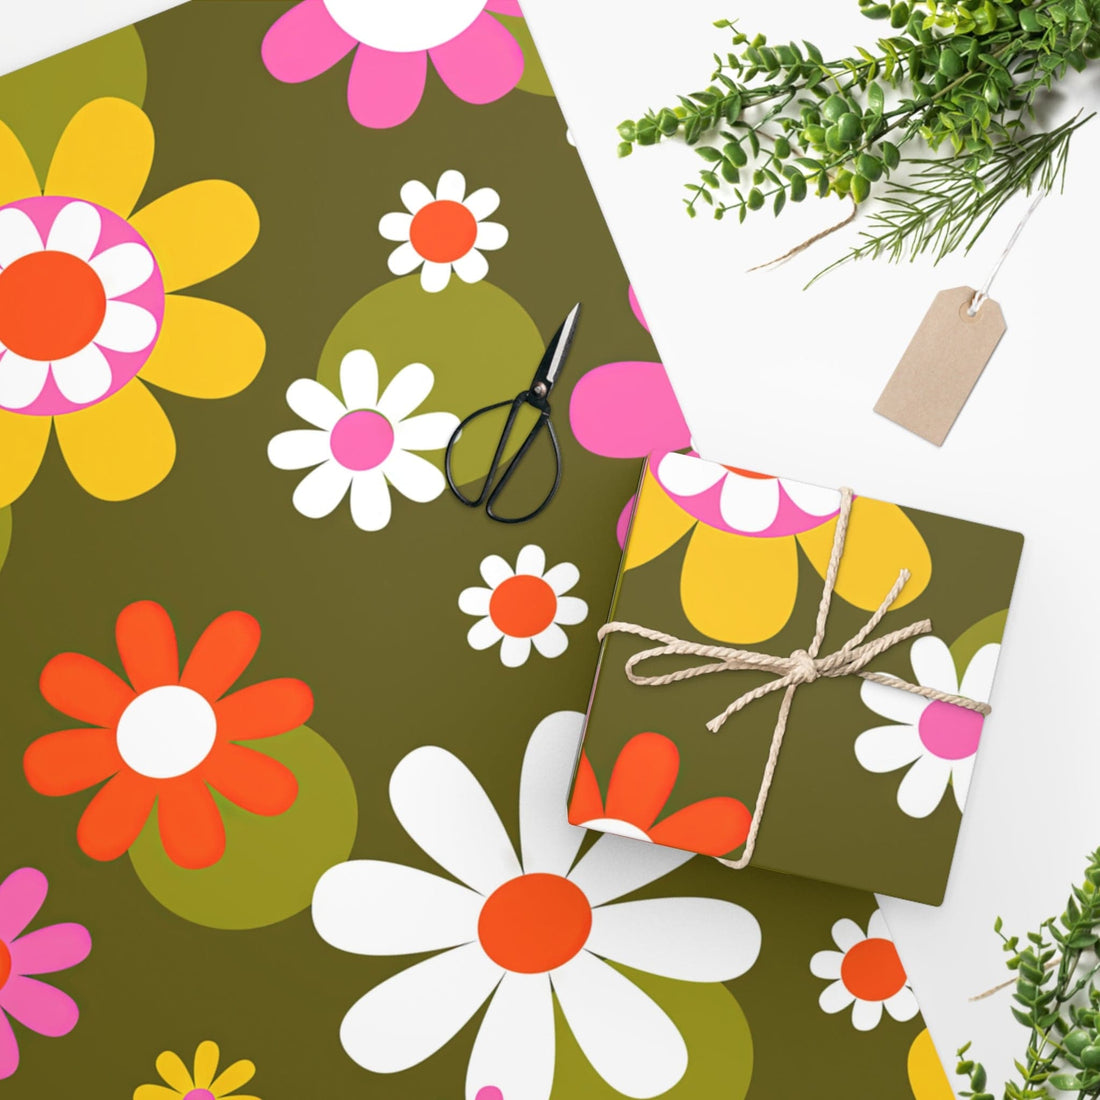 Printify Groovy Hippie Daisy Flower Power Wrapping Paper, Mid Century Modern Retro Gift Wrap Home Decor 24&quot; × 36&quot; 26010754124761524967